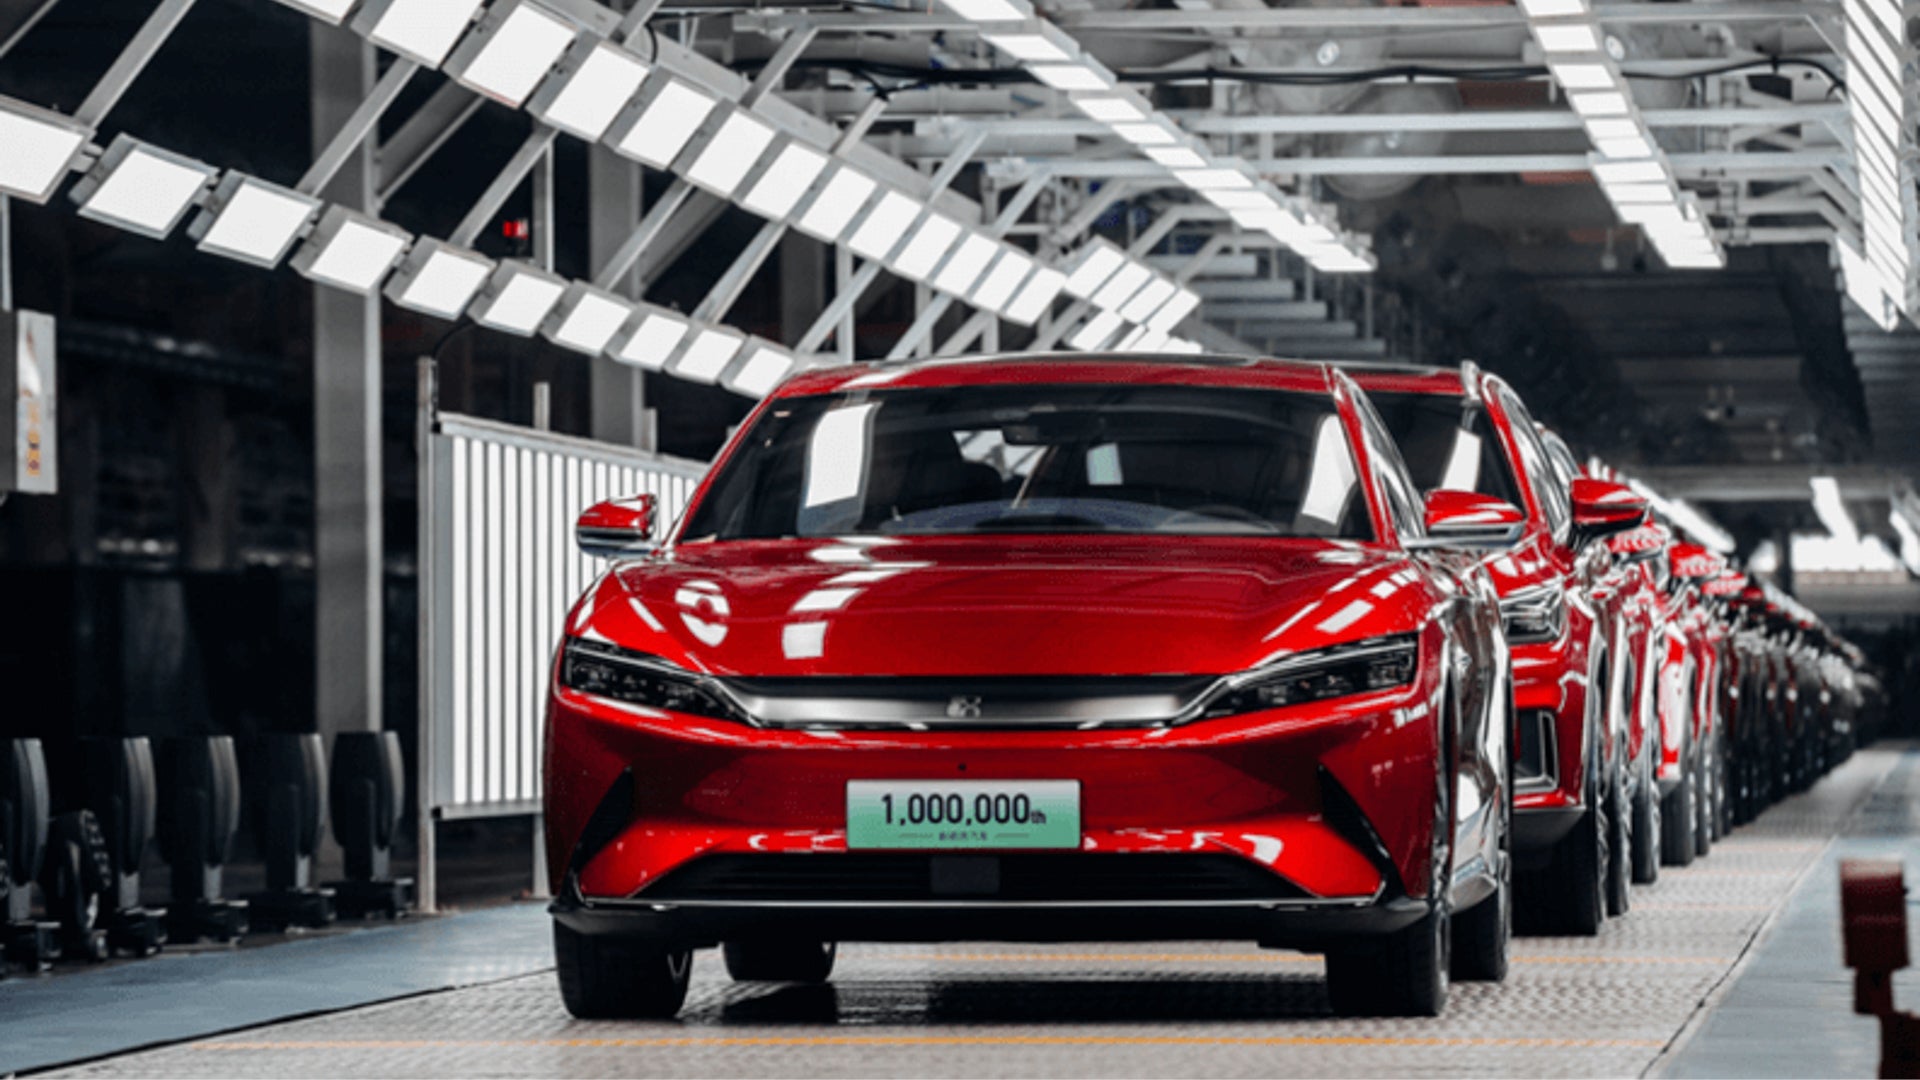 Automaker BYD Under Investigation for Polluting Communities in China